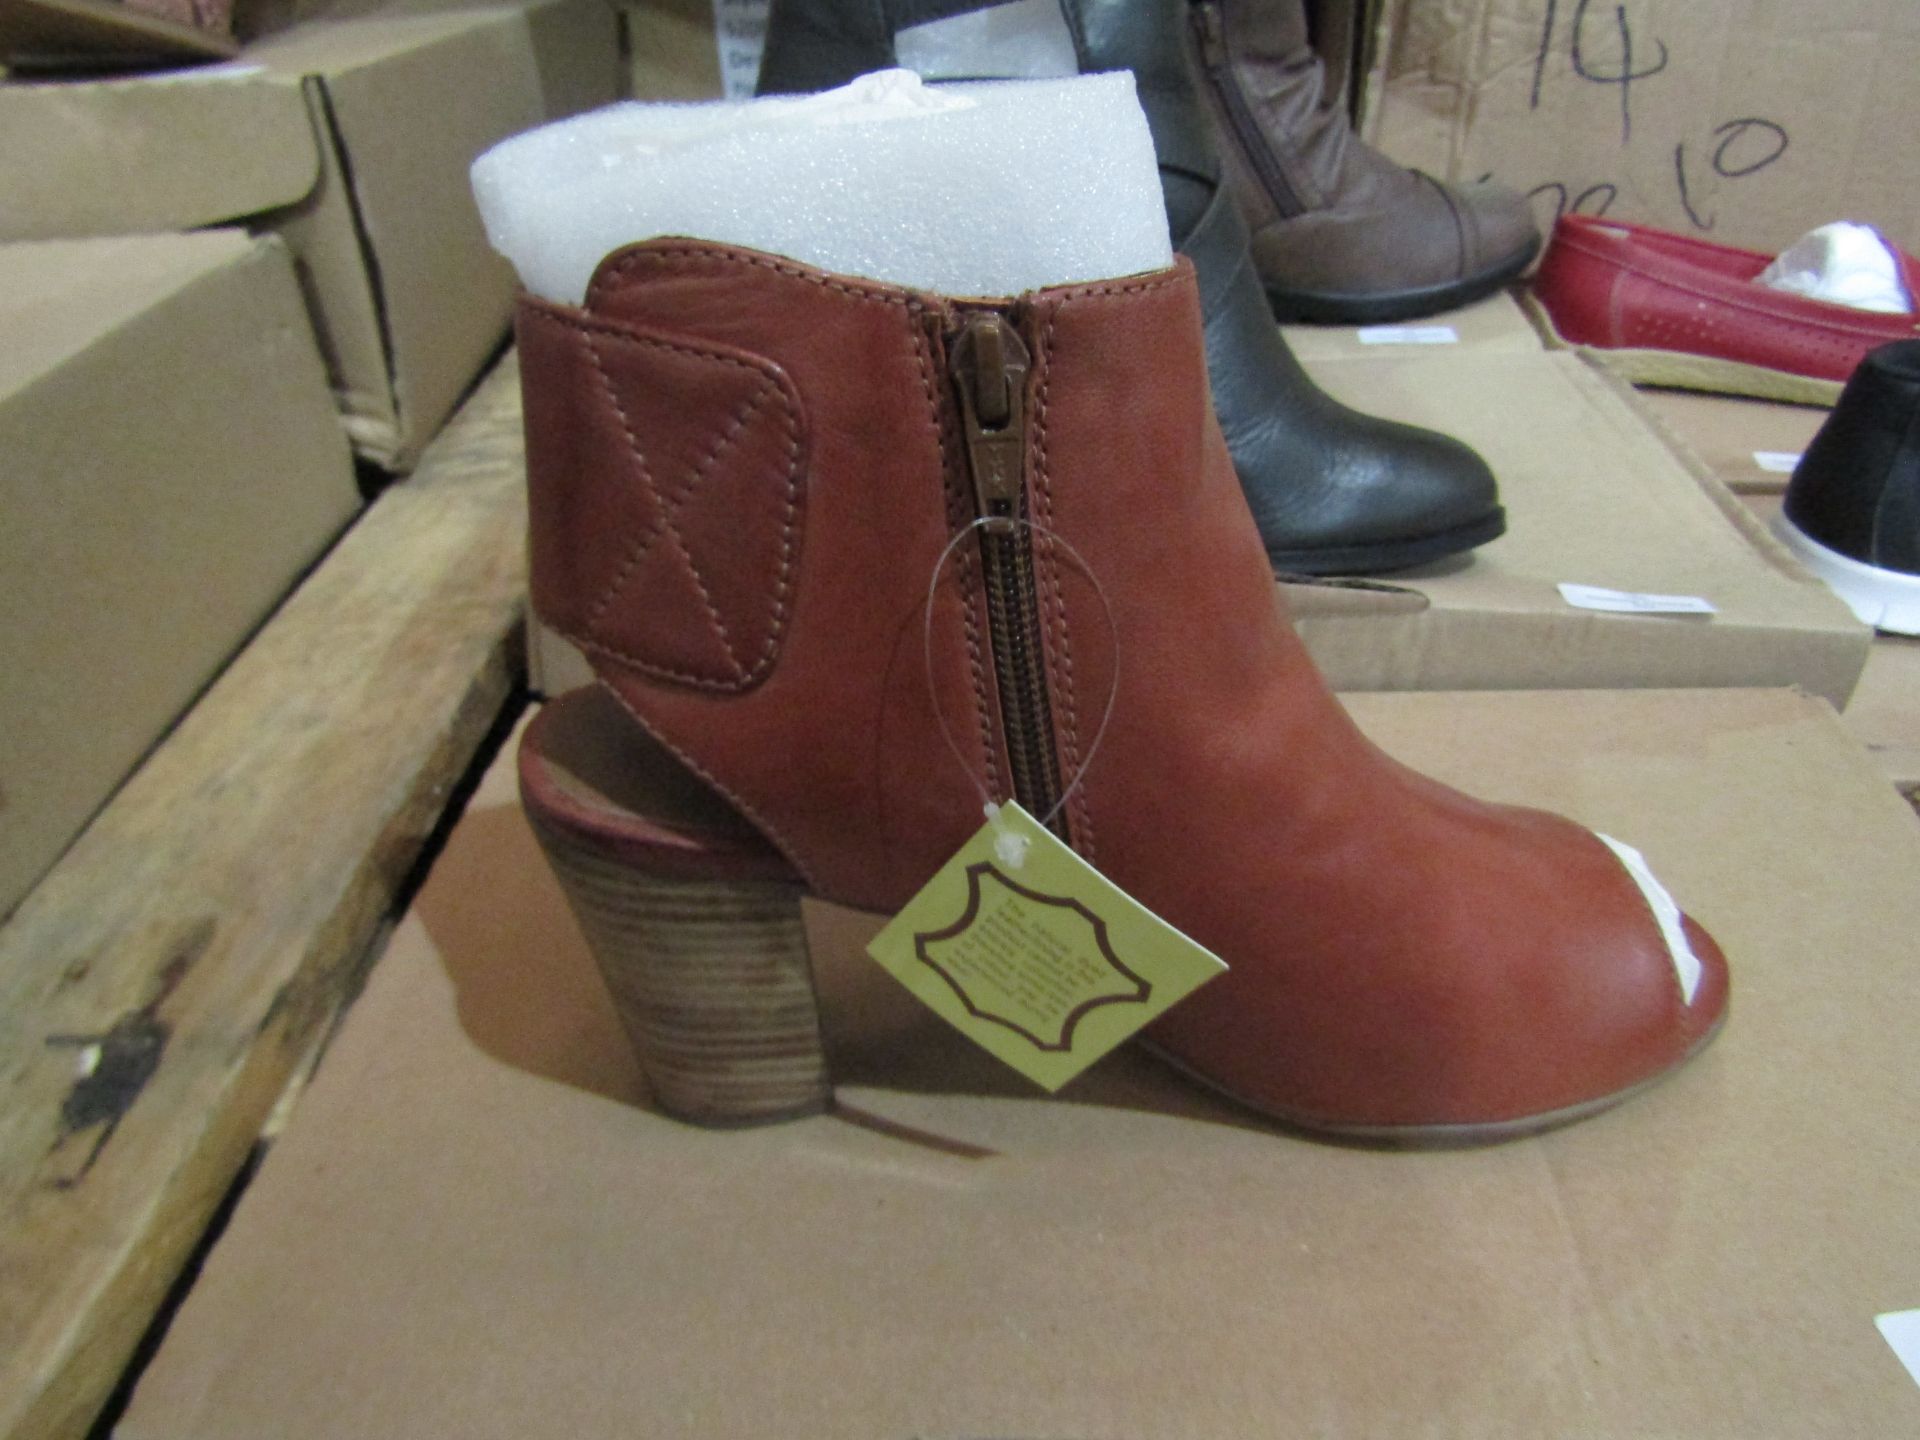 JD Williams Heavenly Soles High Ankle Heelled Boots, Size: 6 - Unused & Boxed.